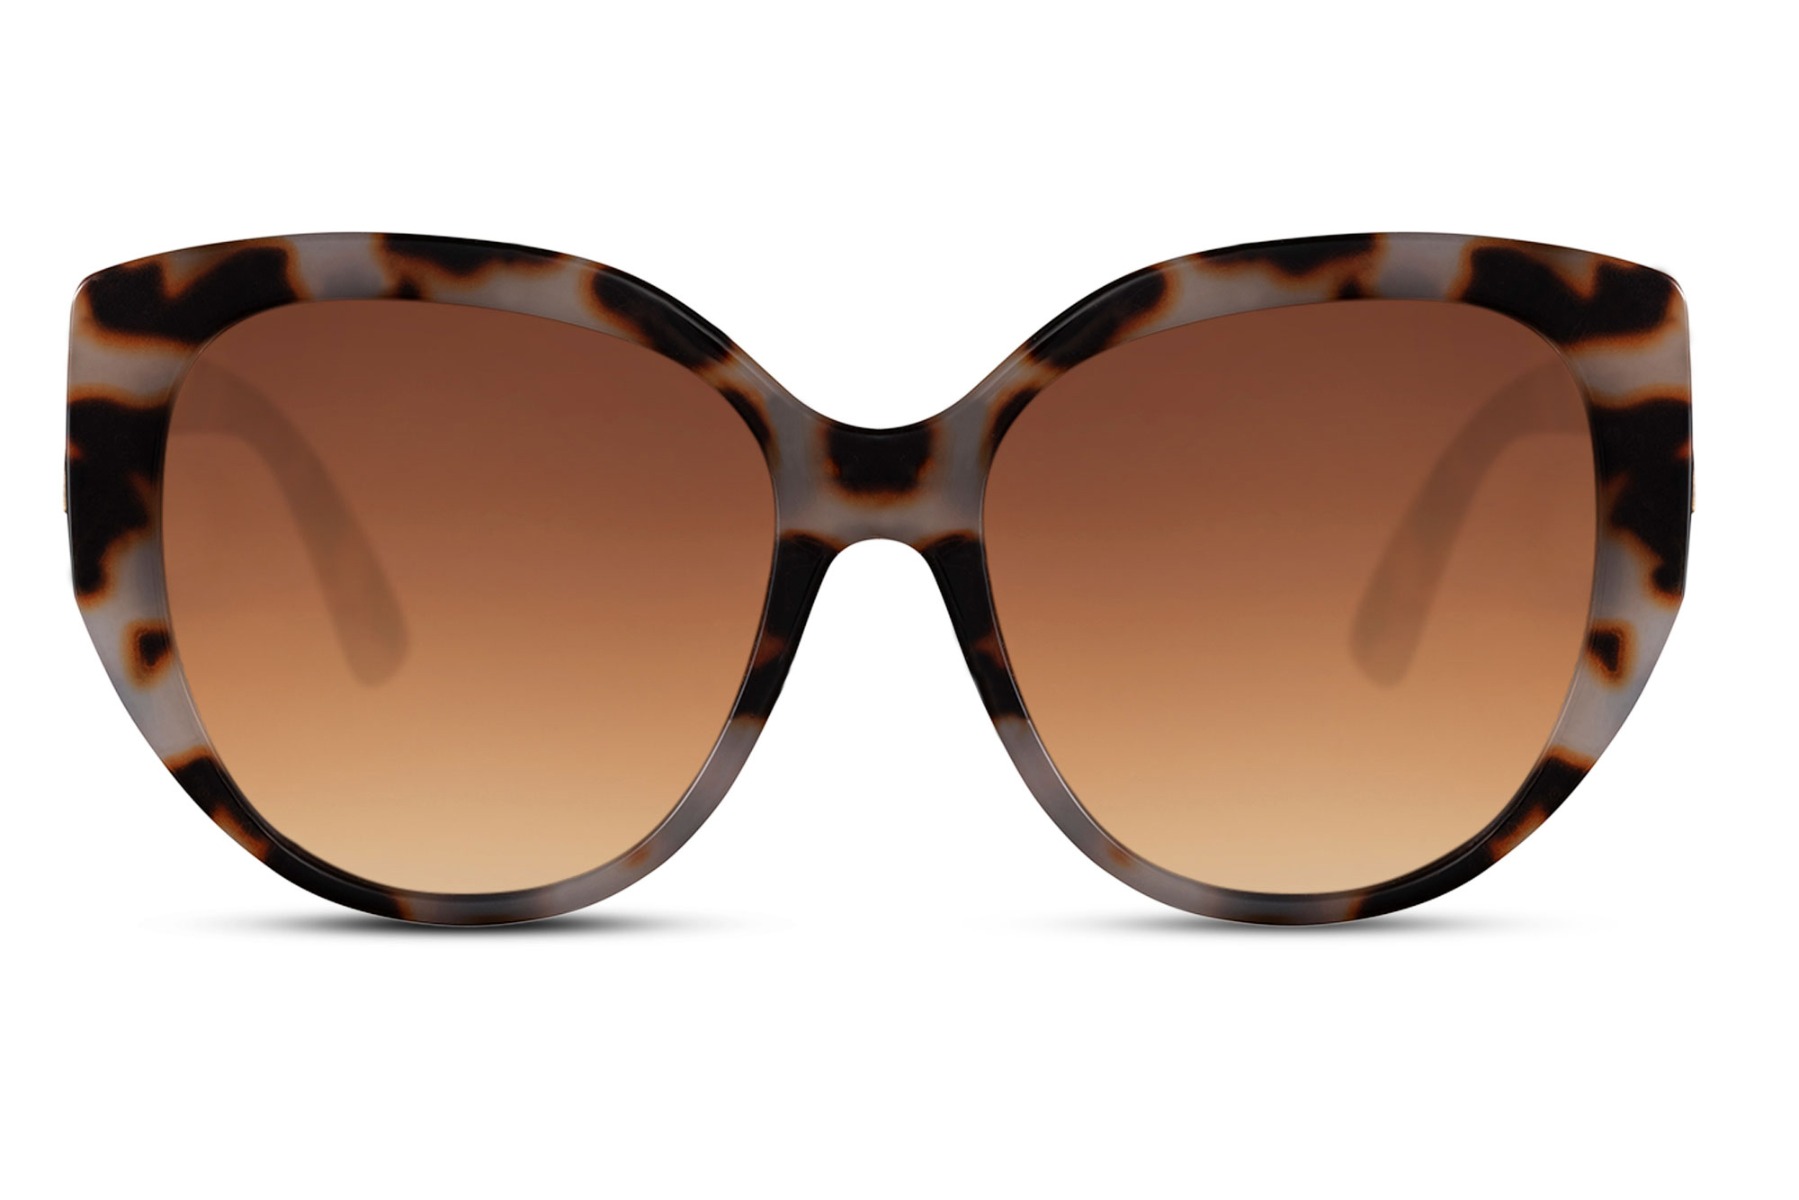 Details more than 156 buy dior sunglasses india